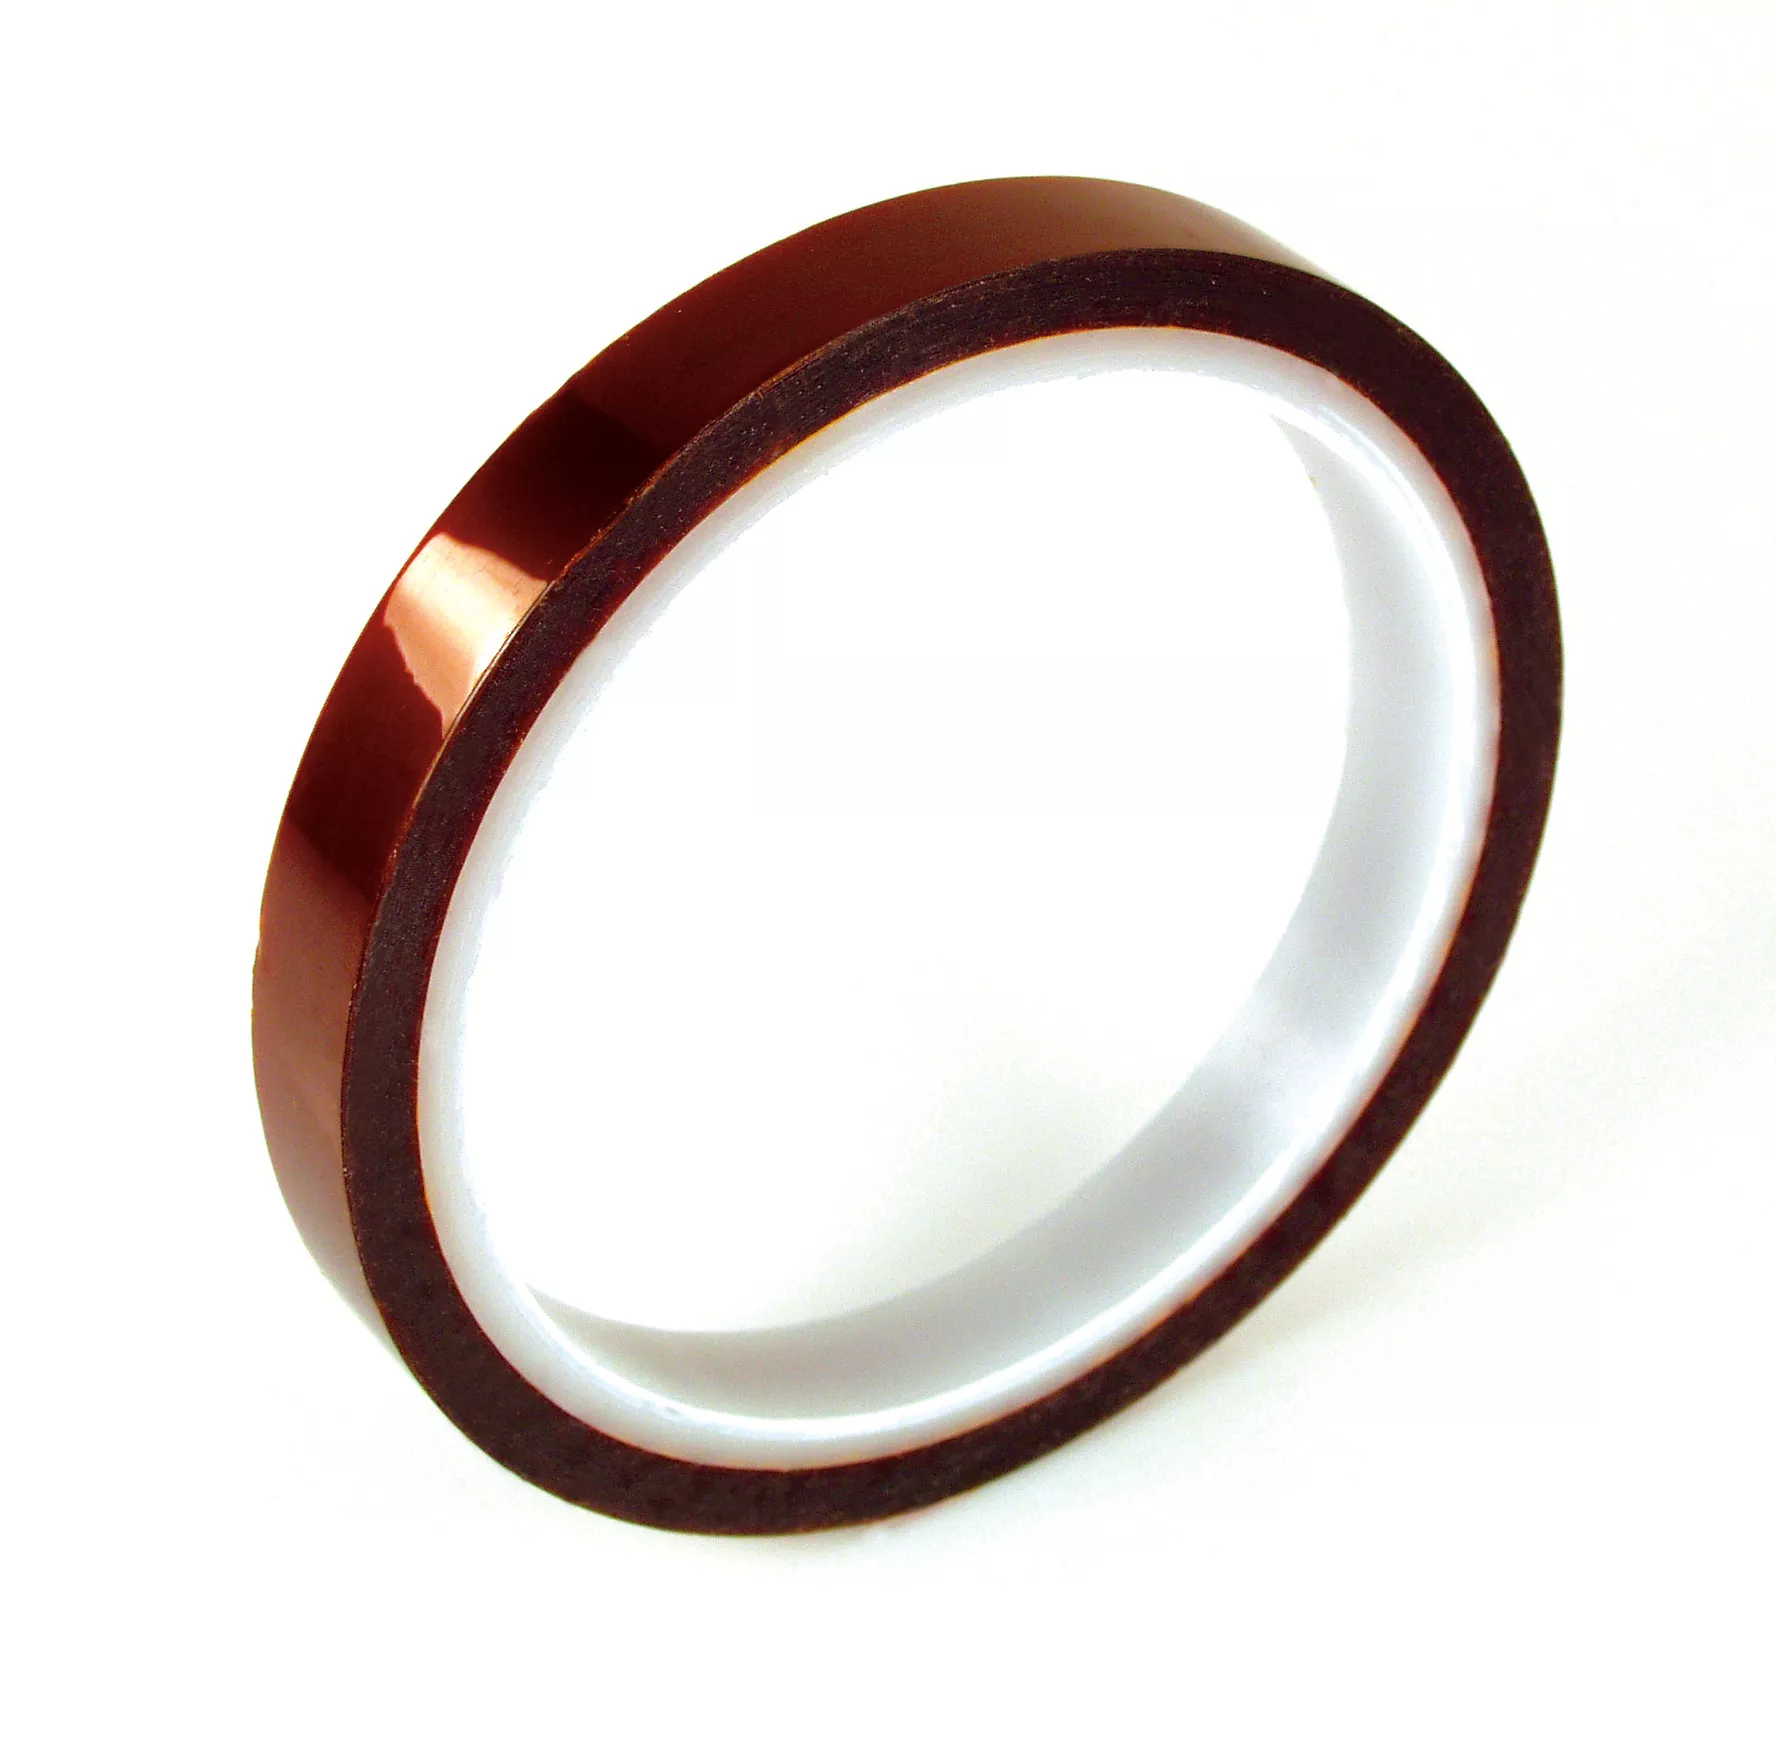 SKU 7100065800 | 3M™ Polyimide Film Electrical Tape 1205